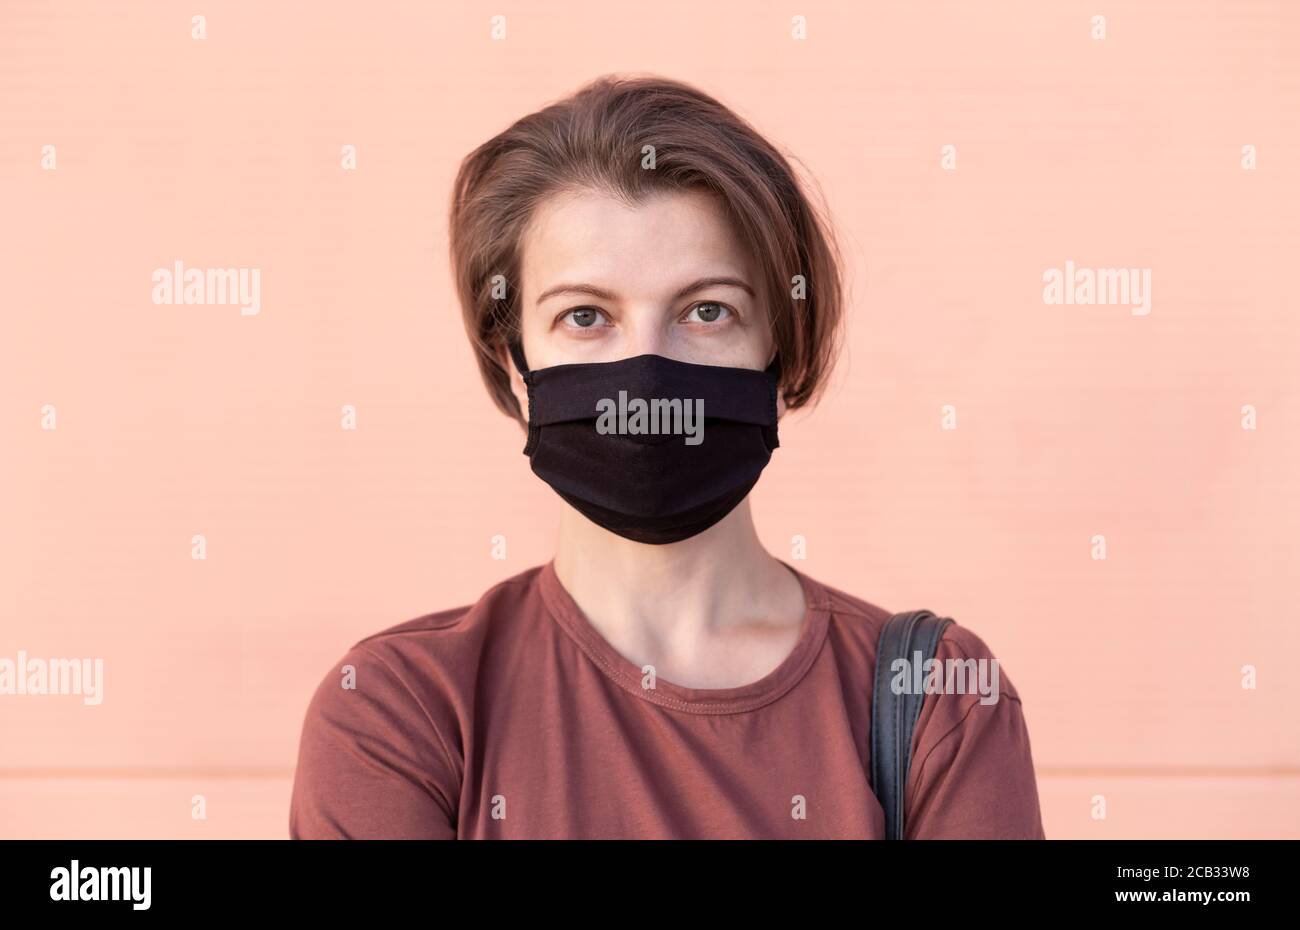 Portrait of a woman in a medical mask. Stock Photo